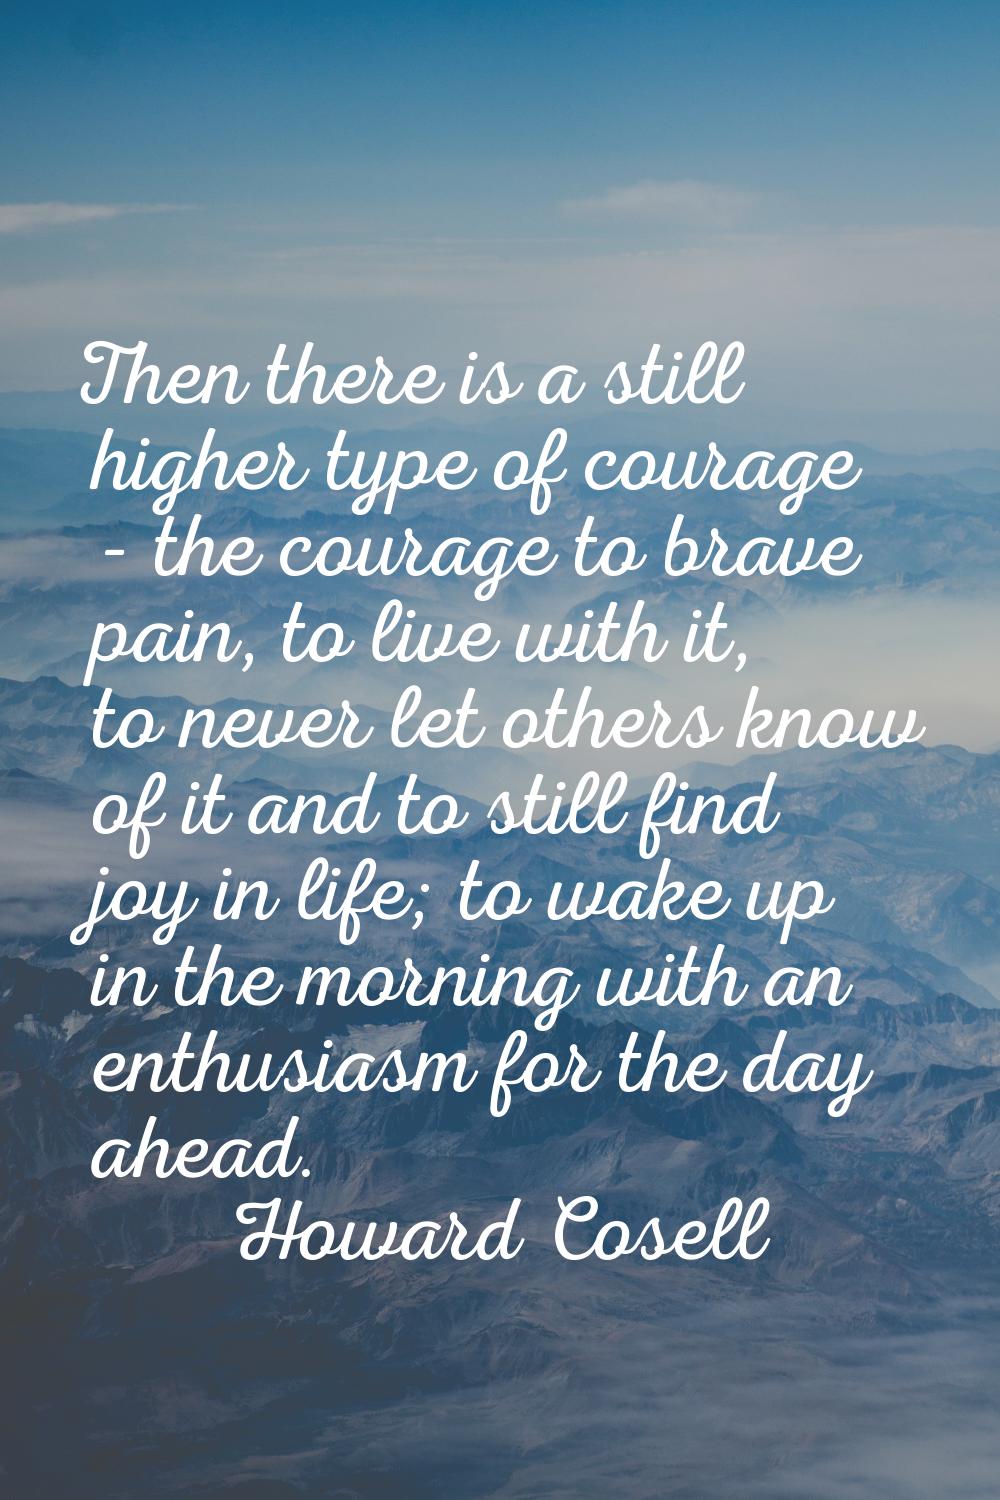 Then there is a still higher type of courage - the courage to brave pain, to live with it, to never